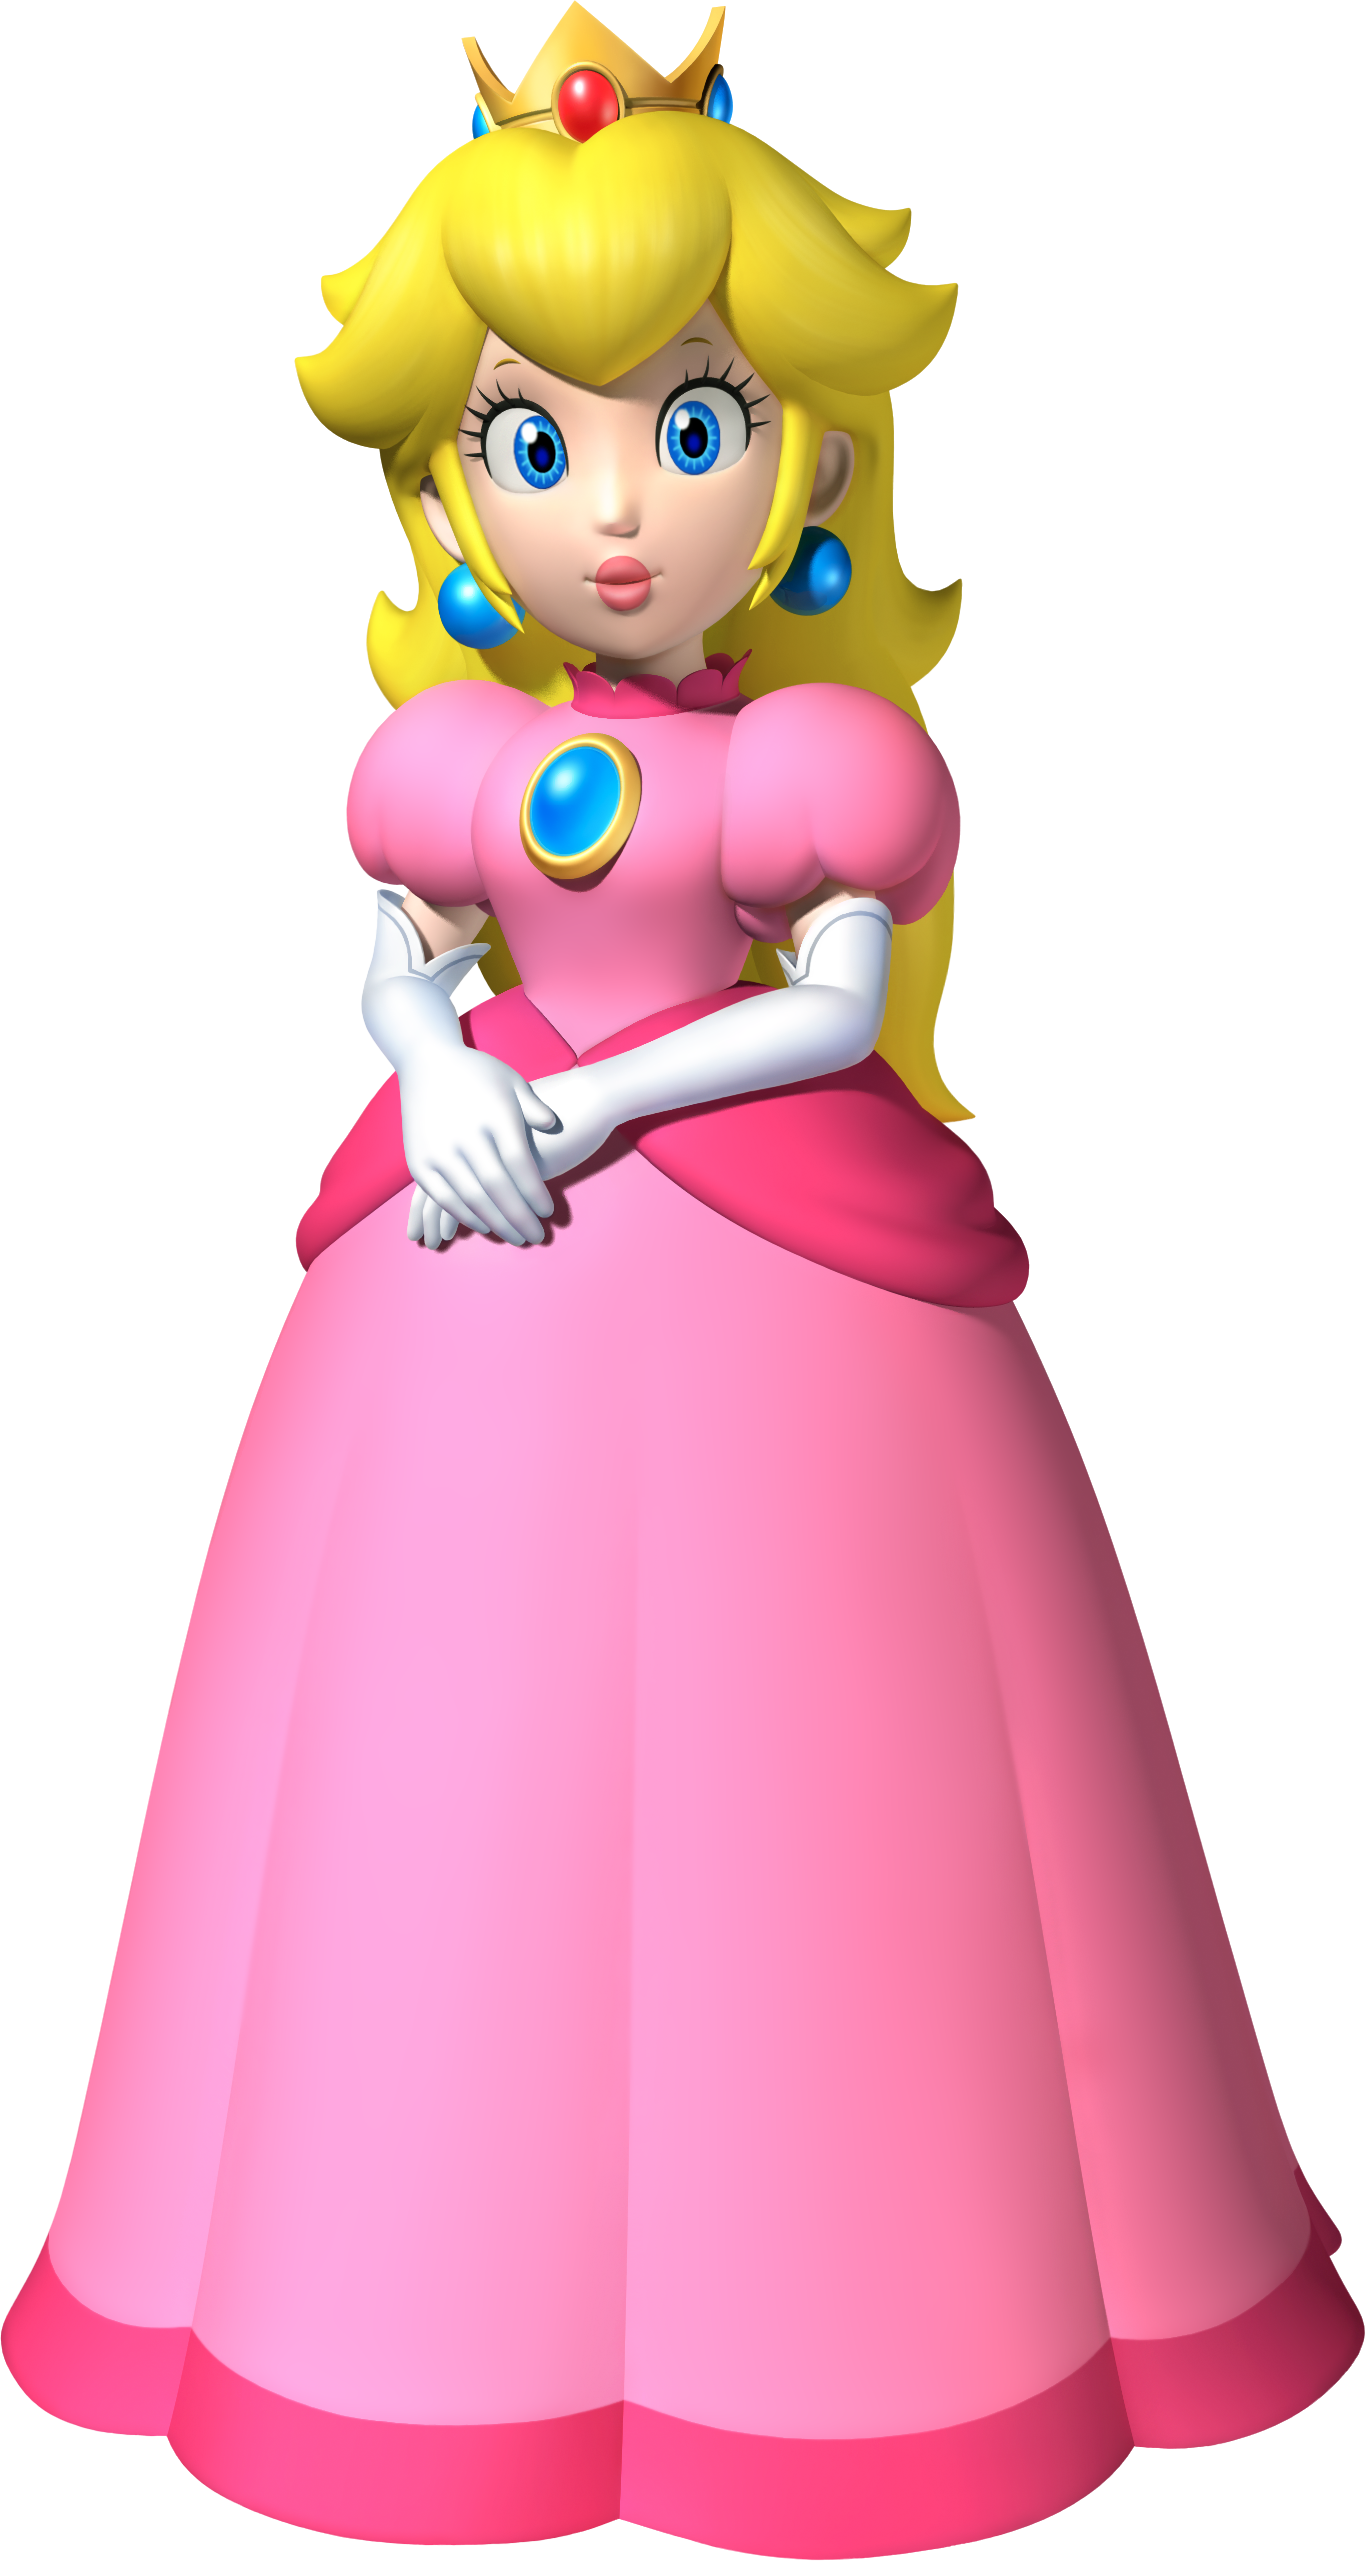 Princess Peach - The Nintendo Wiki - Wii, Nintendo DS, and all things ...